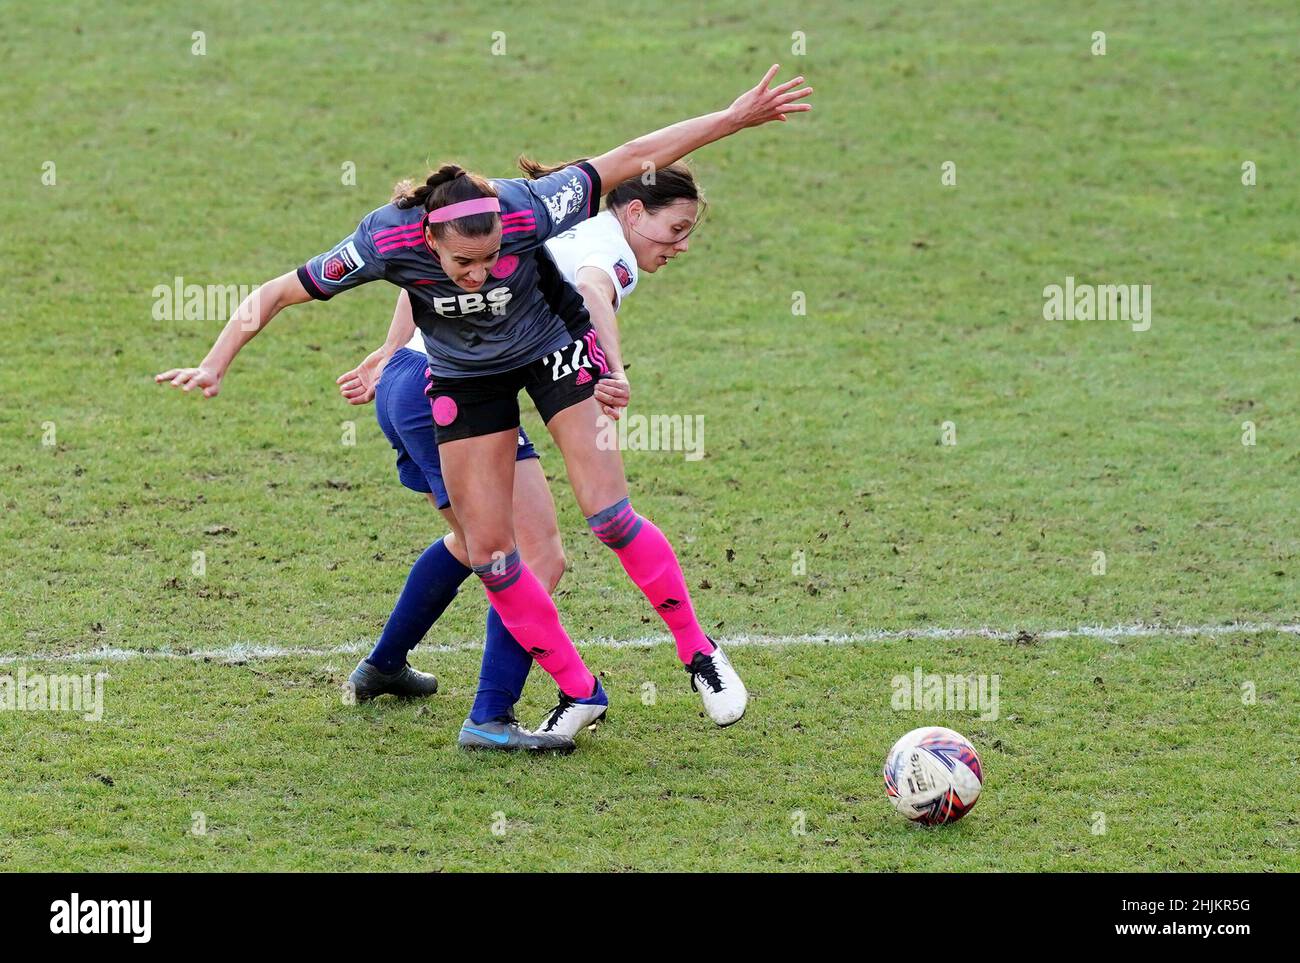 Tottenham Hotspur's Rachel Williams (right) and Leicester City's Ashleigh Plumptre battle for the ball during the Vitality Women's FA Cup fourth round match at The Hive, London. Picture date: Sunday January 30, 2022. Stock Photo